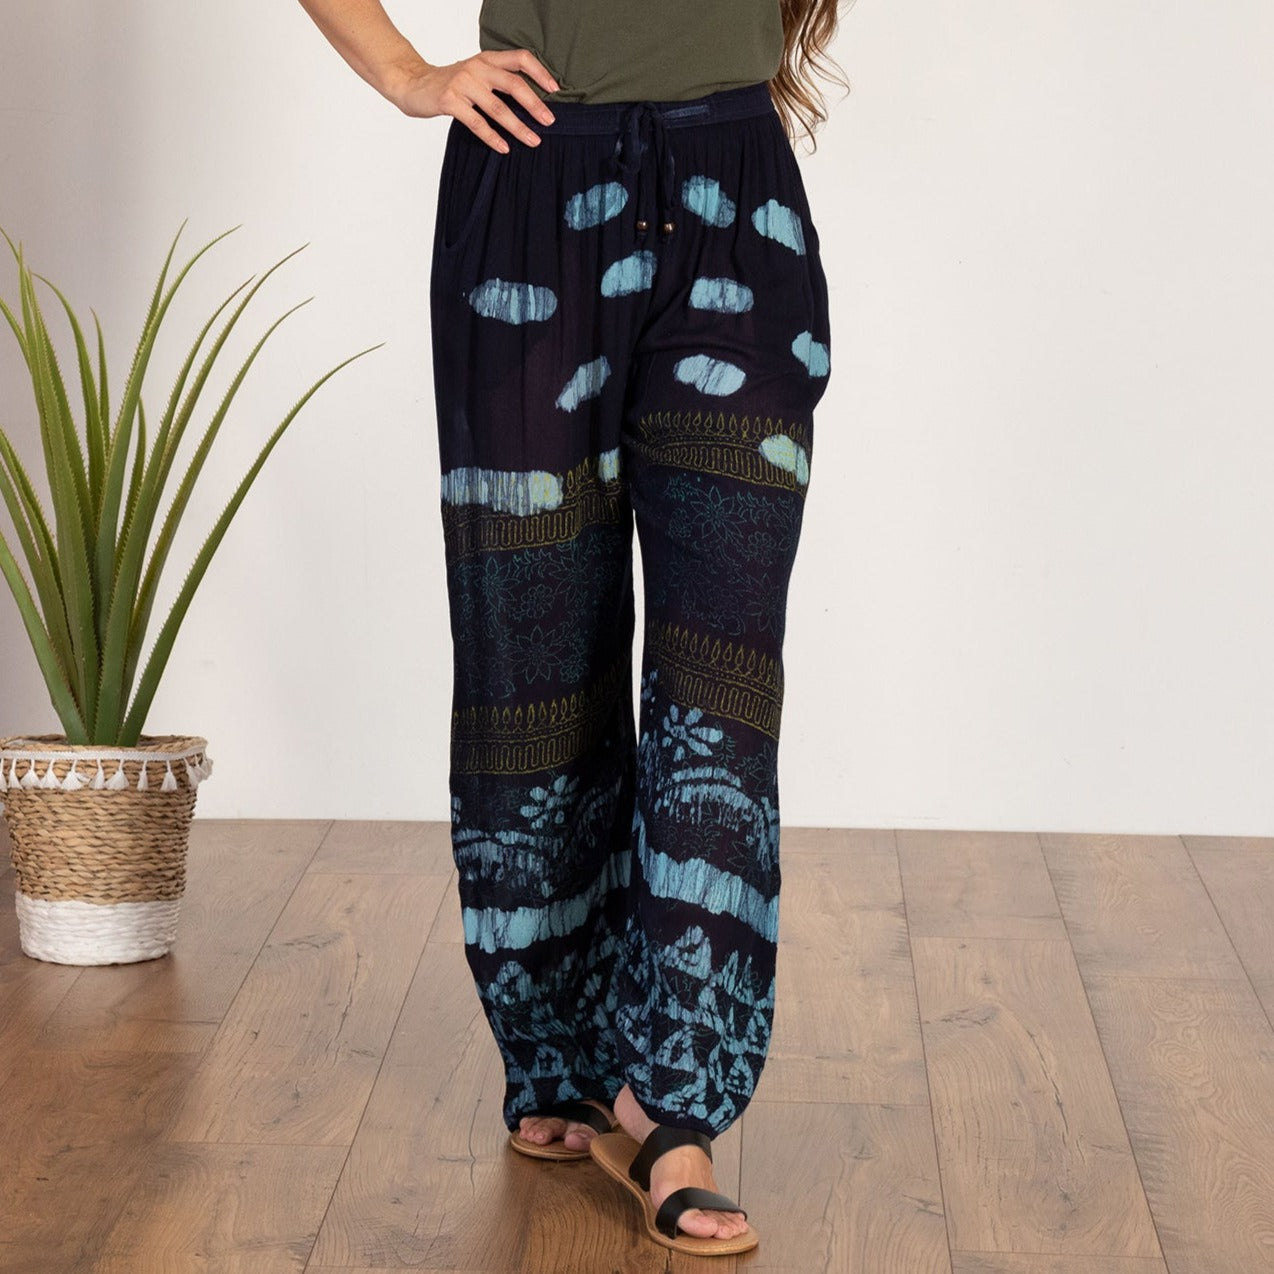 Women's Made To Move Casual Palazzo Pants & Top Set - Pants - Black & Blue - 1X